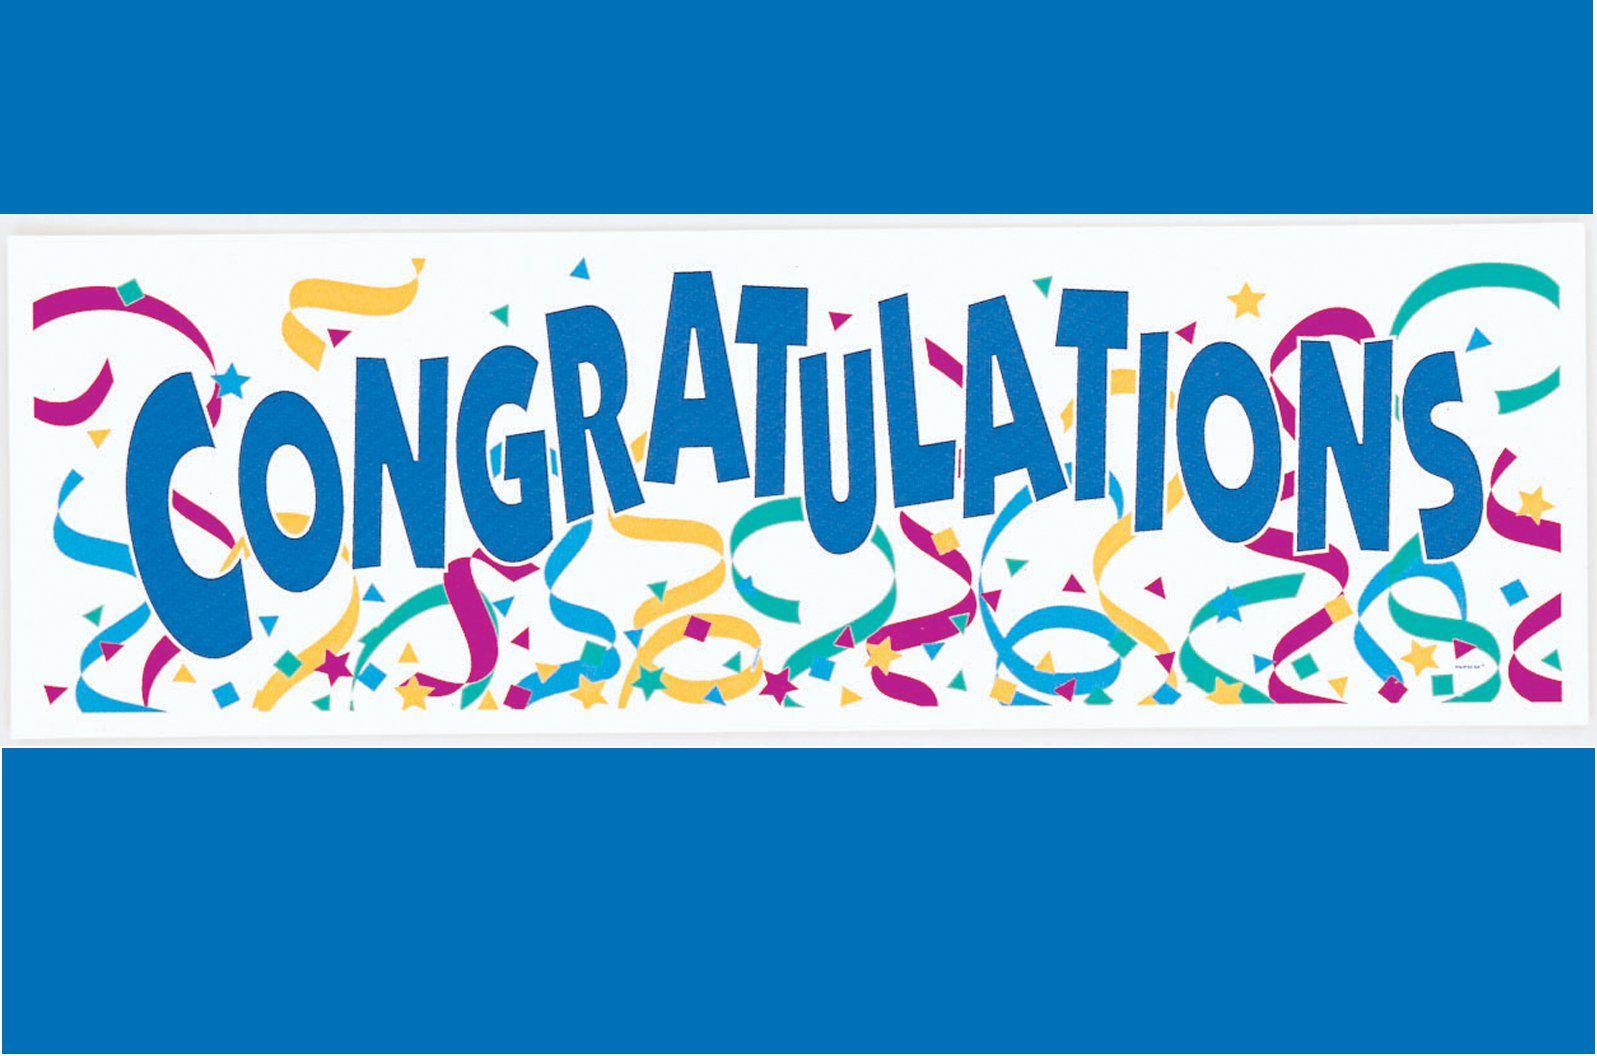 Congratulations Pictures Free Download Banner Design  HD Wallpapers   Wallpapers Download  High Resolution Wallpapers  Congratulations  pictures Congratulations images Picture frame template